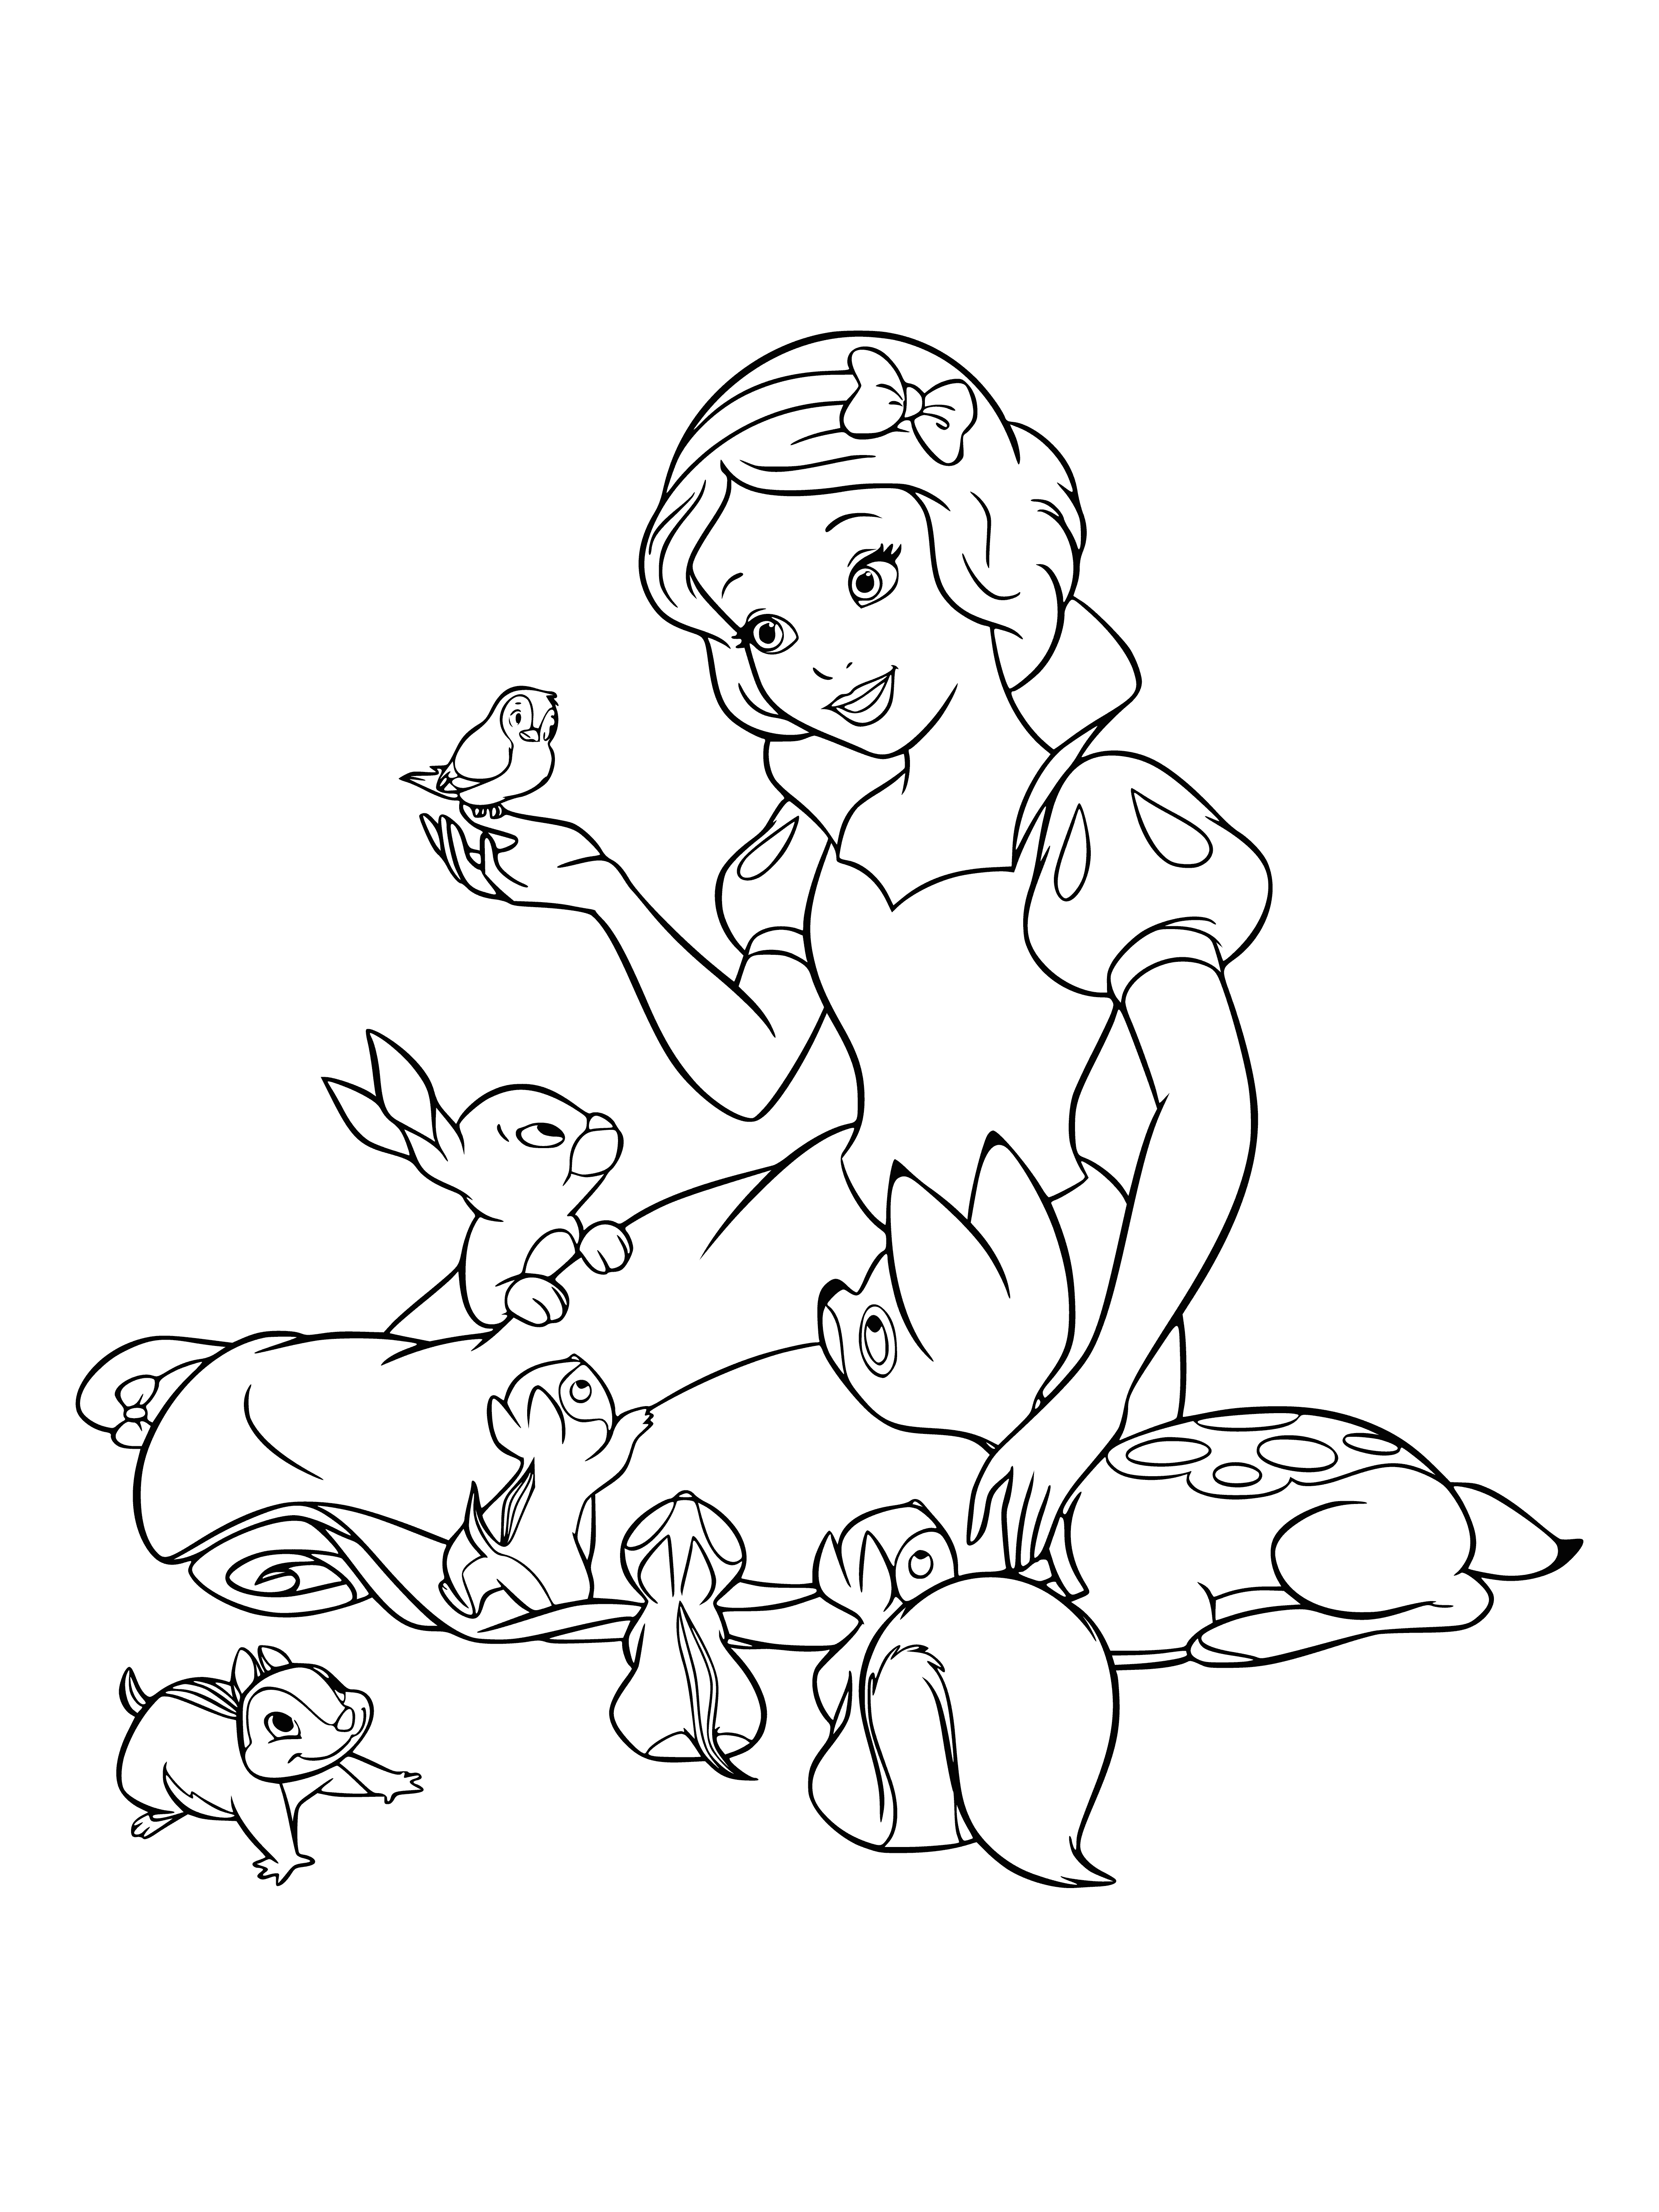 Snow White and the Animals coloring page